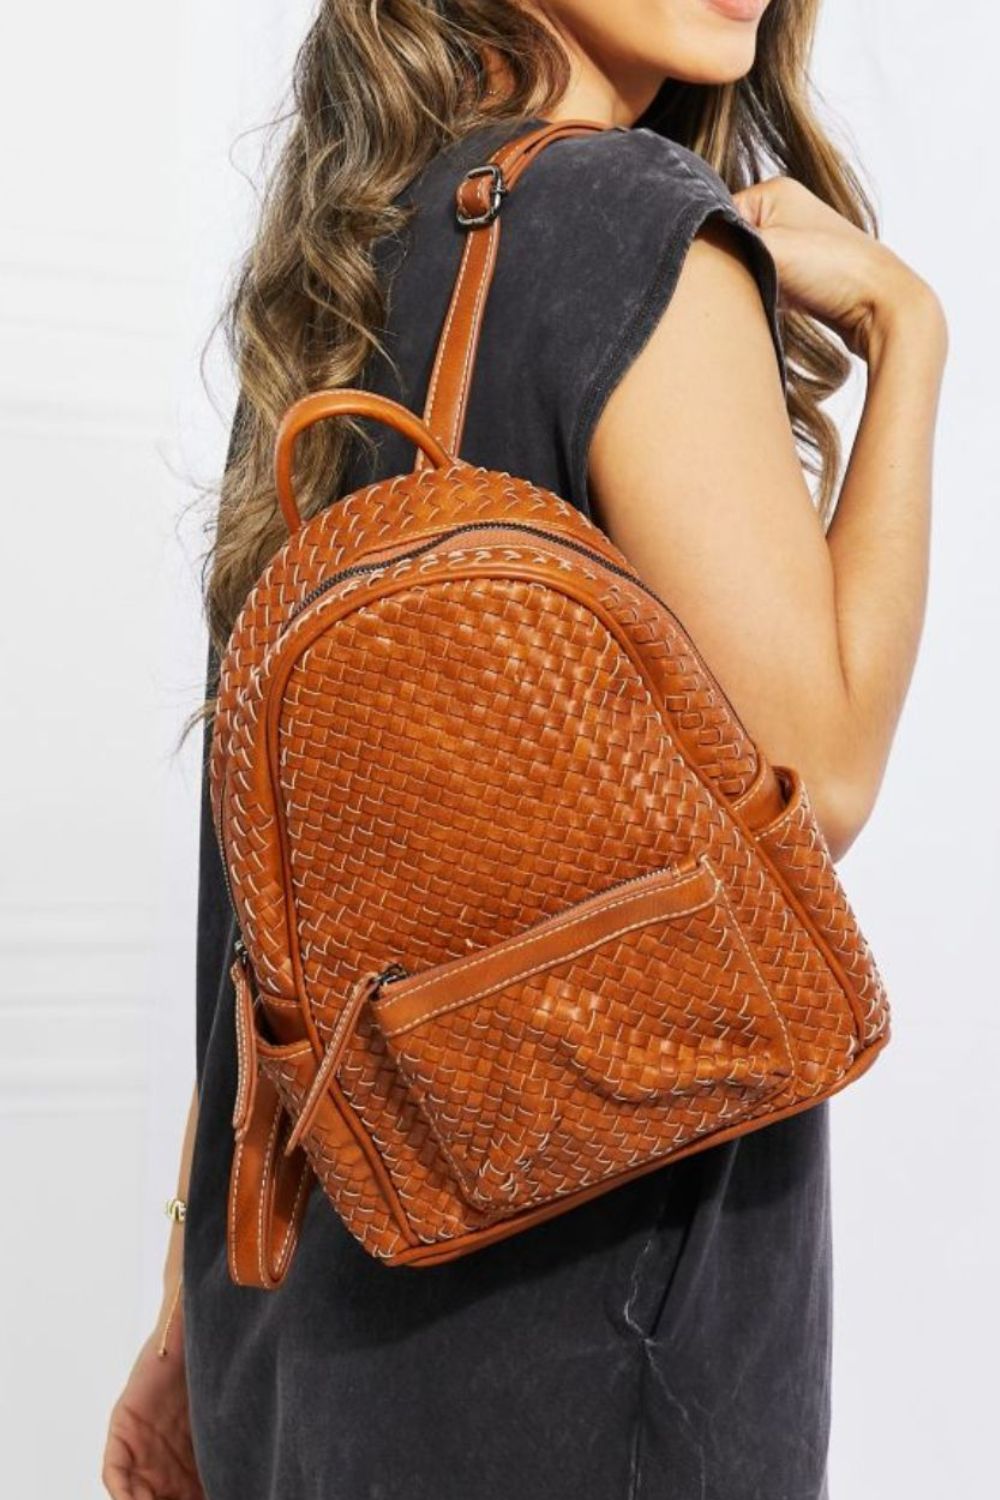 SHOMICO Certainly Chic Faux Leather Woven Backpack - bertofonsi